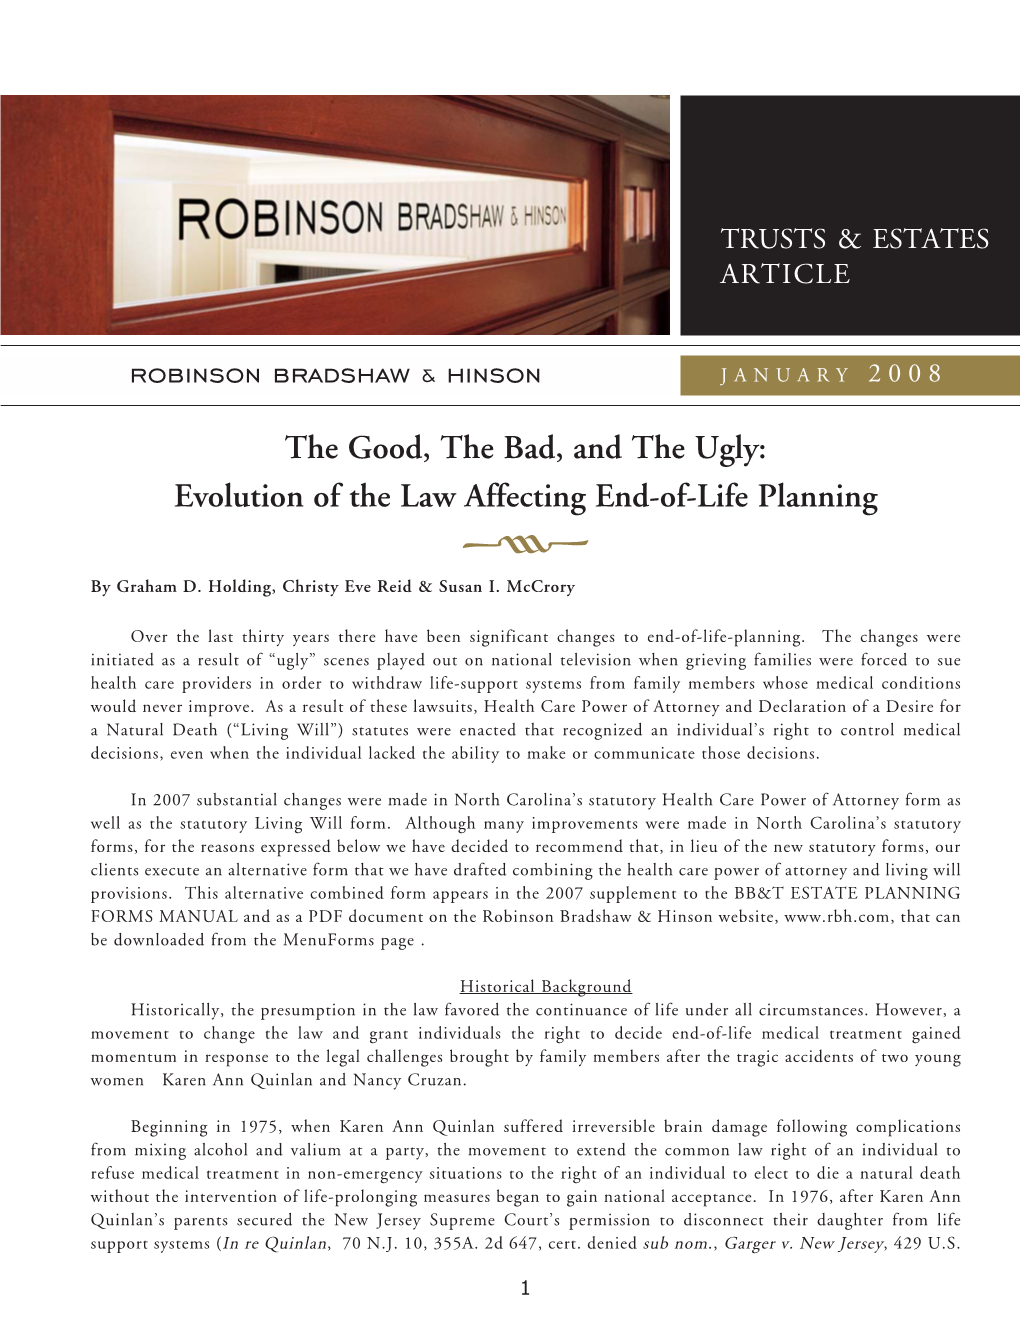 Evolution of the Law Affecting End-Of-Life Planning